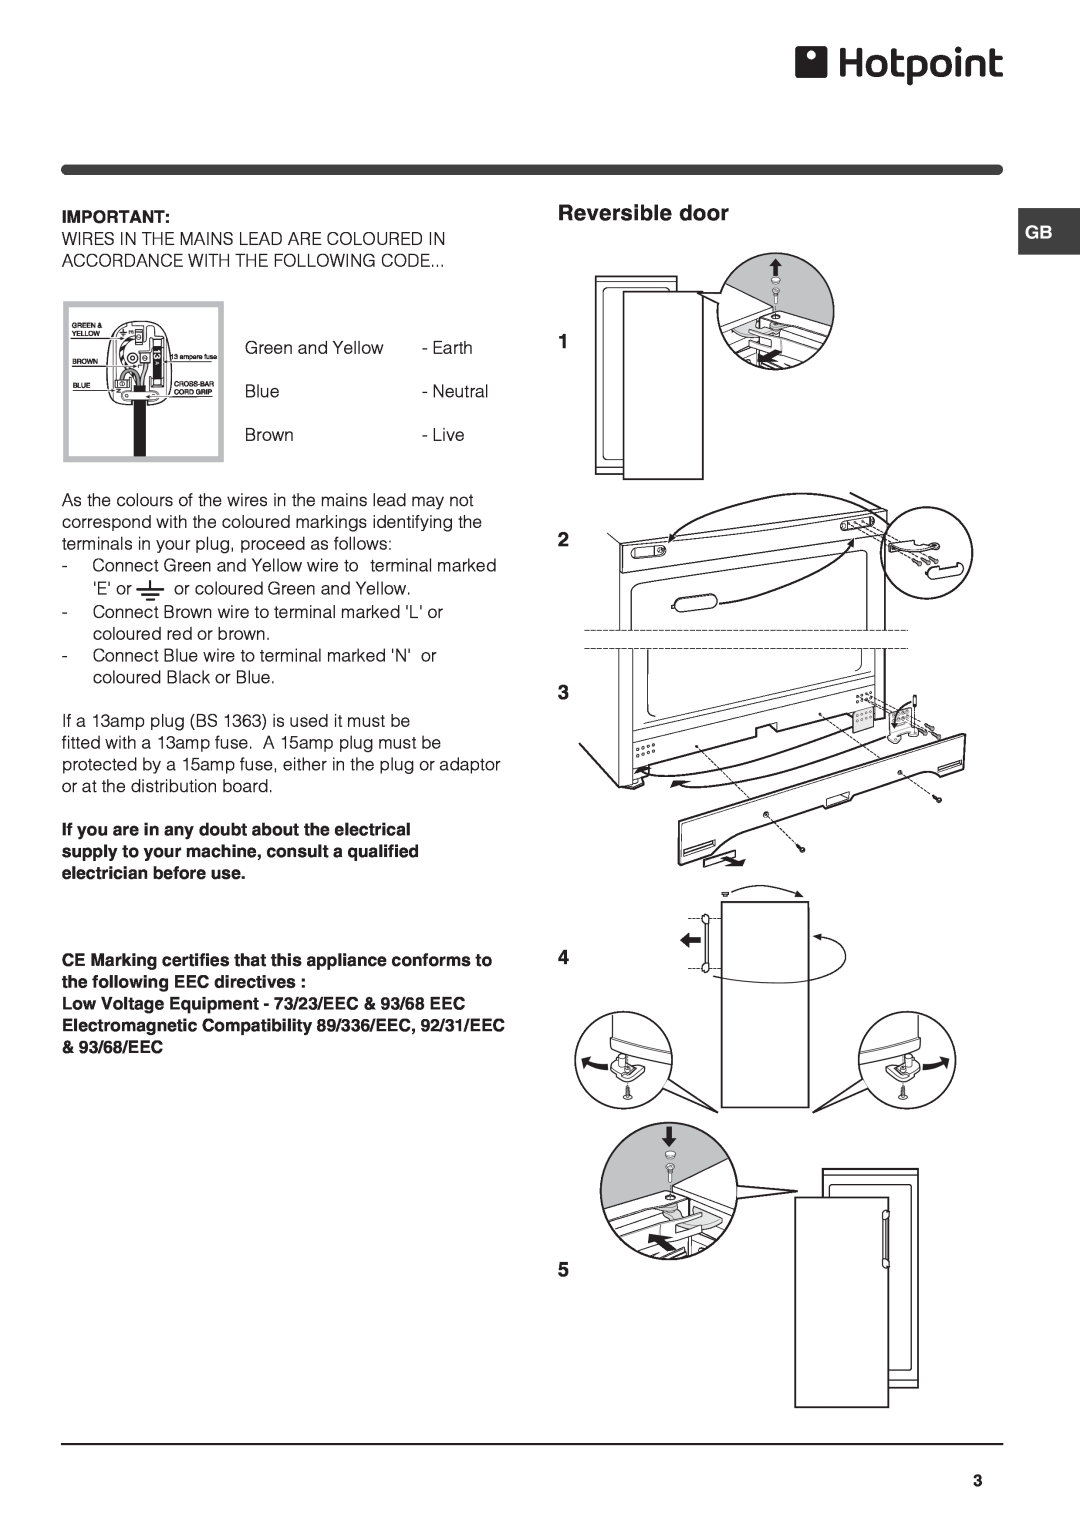 Hotpoint FZS175X, FZS175P, FZS175G operating instructions Reversible door 